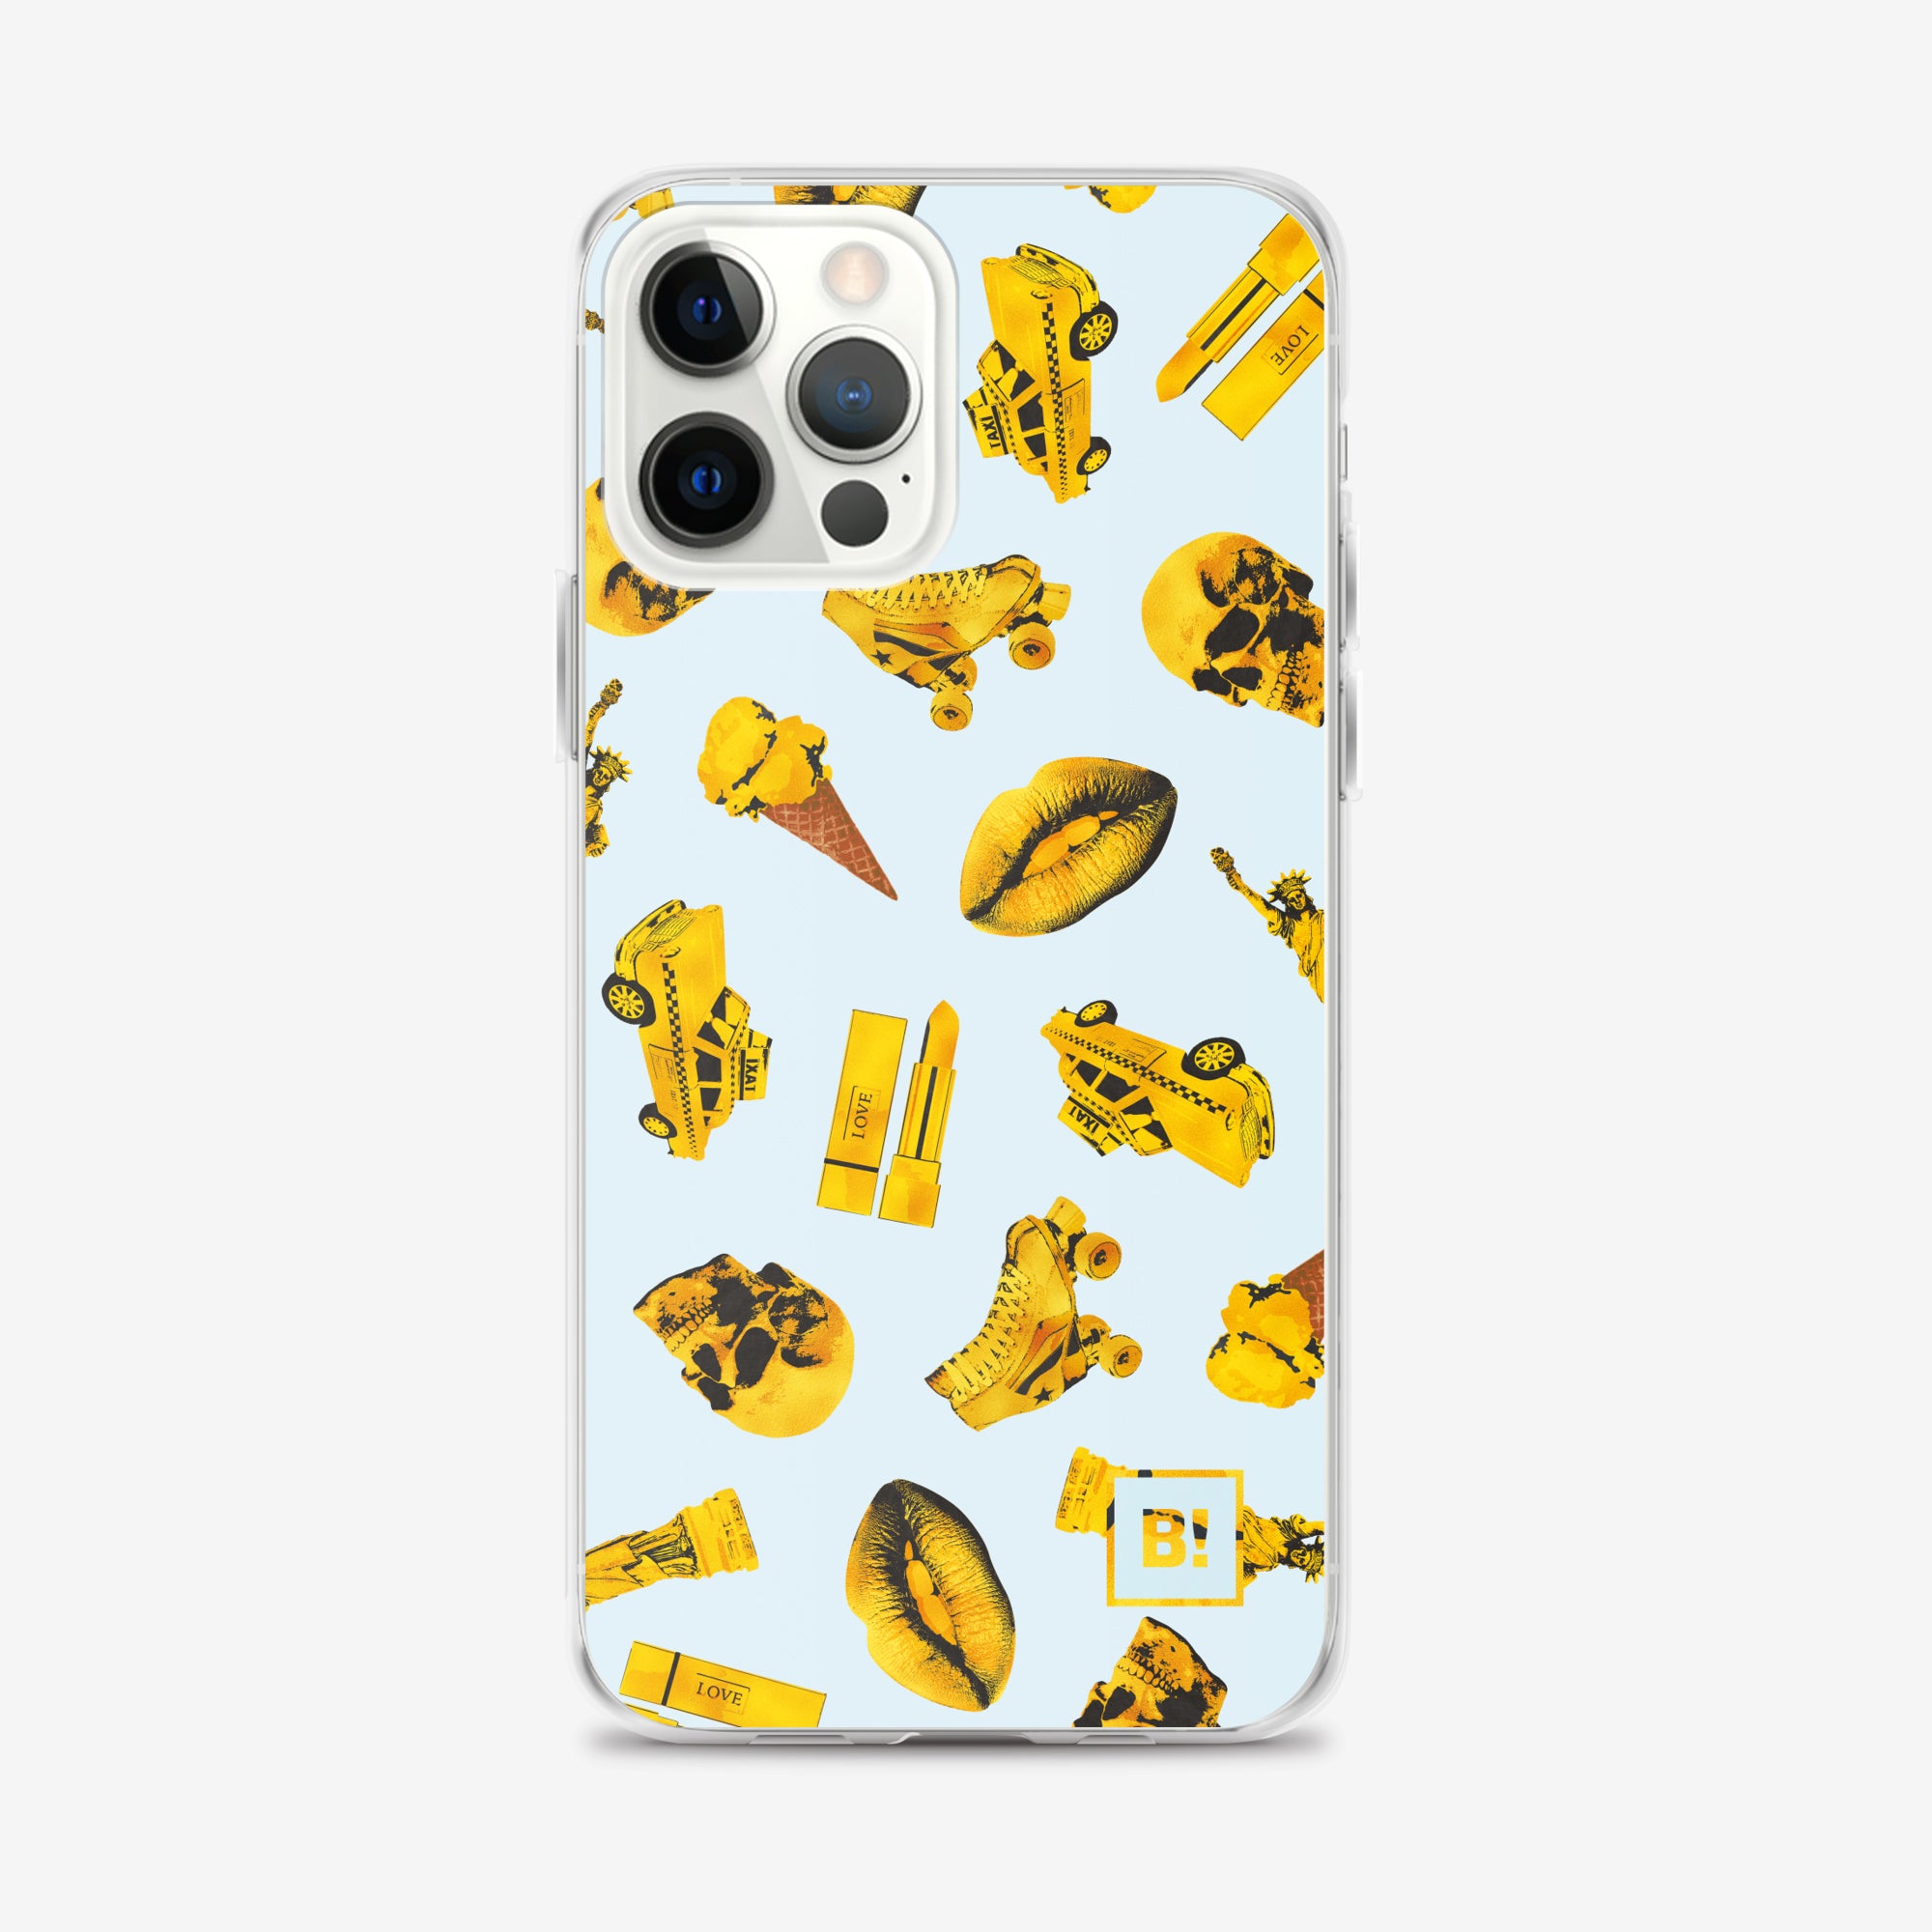 Binspired Golden Collection Pacific Pop Art iPhone 12 Pro Max Clear Case